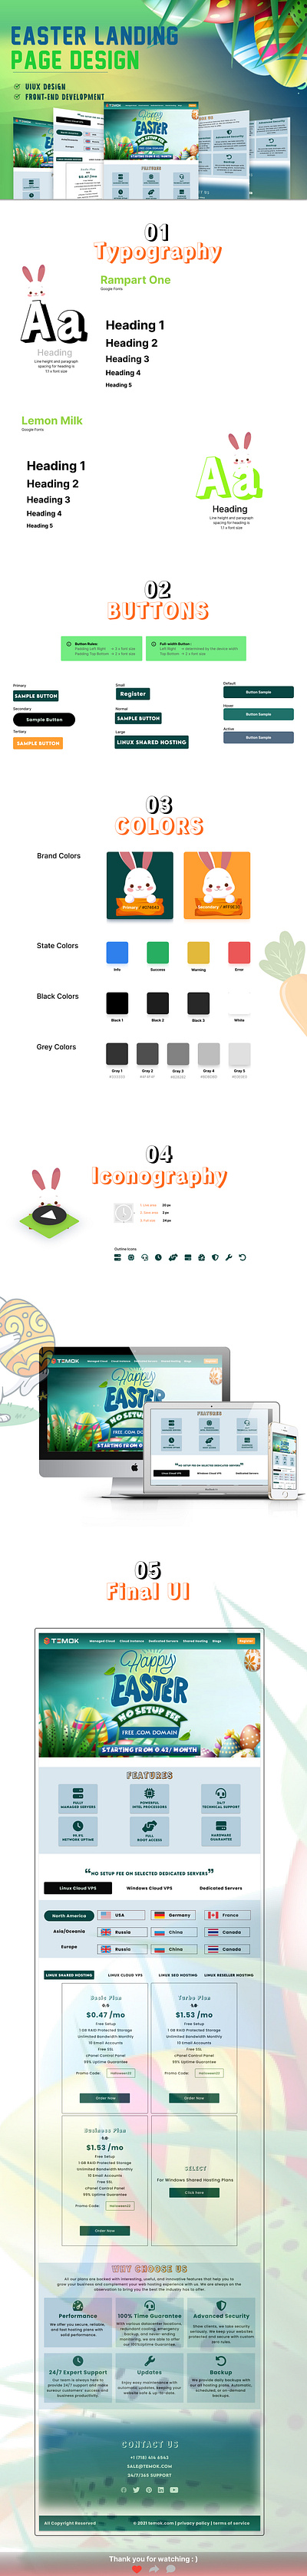 Easter landing page creative landing pages css easter figma html landing page uiux wireframing